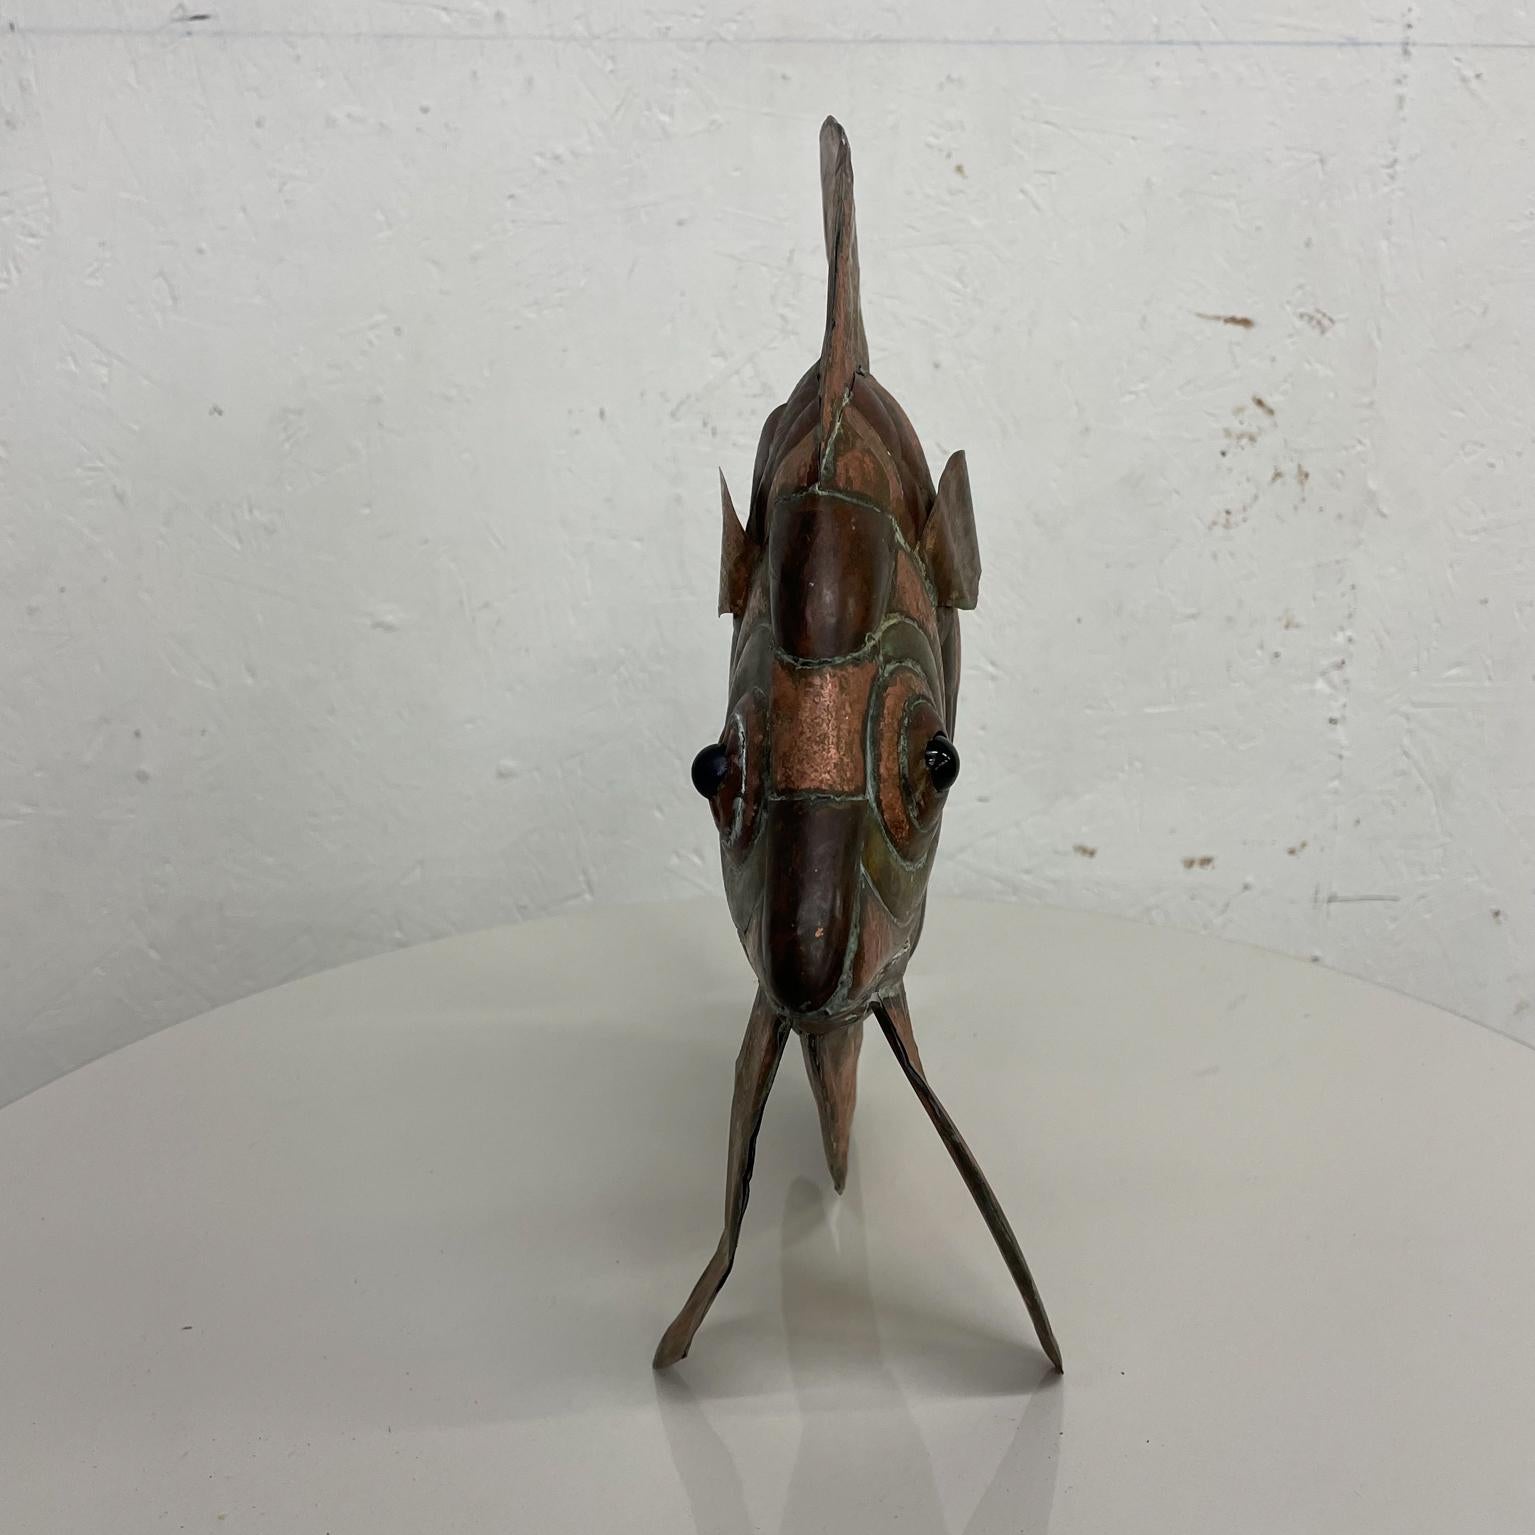 Modern Metal Art Lovely Copper Fish Table Sculpture Style of Los Castillo 2